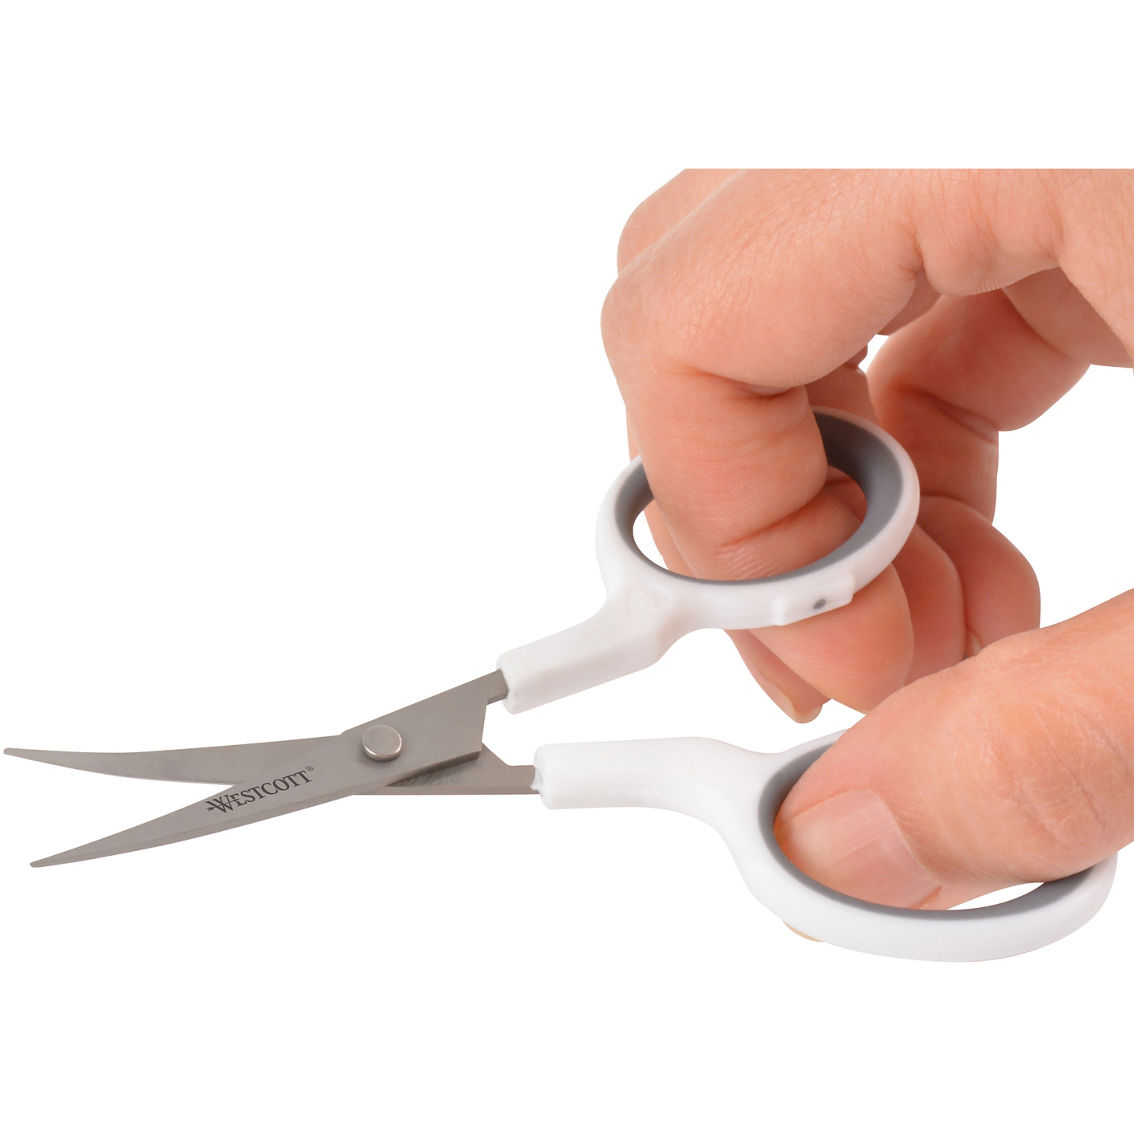 Westcott 4 in. Titanium Bonded Curved Blade Embroidery Scissors - Image 5 of 5